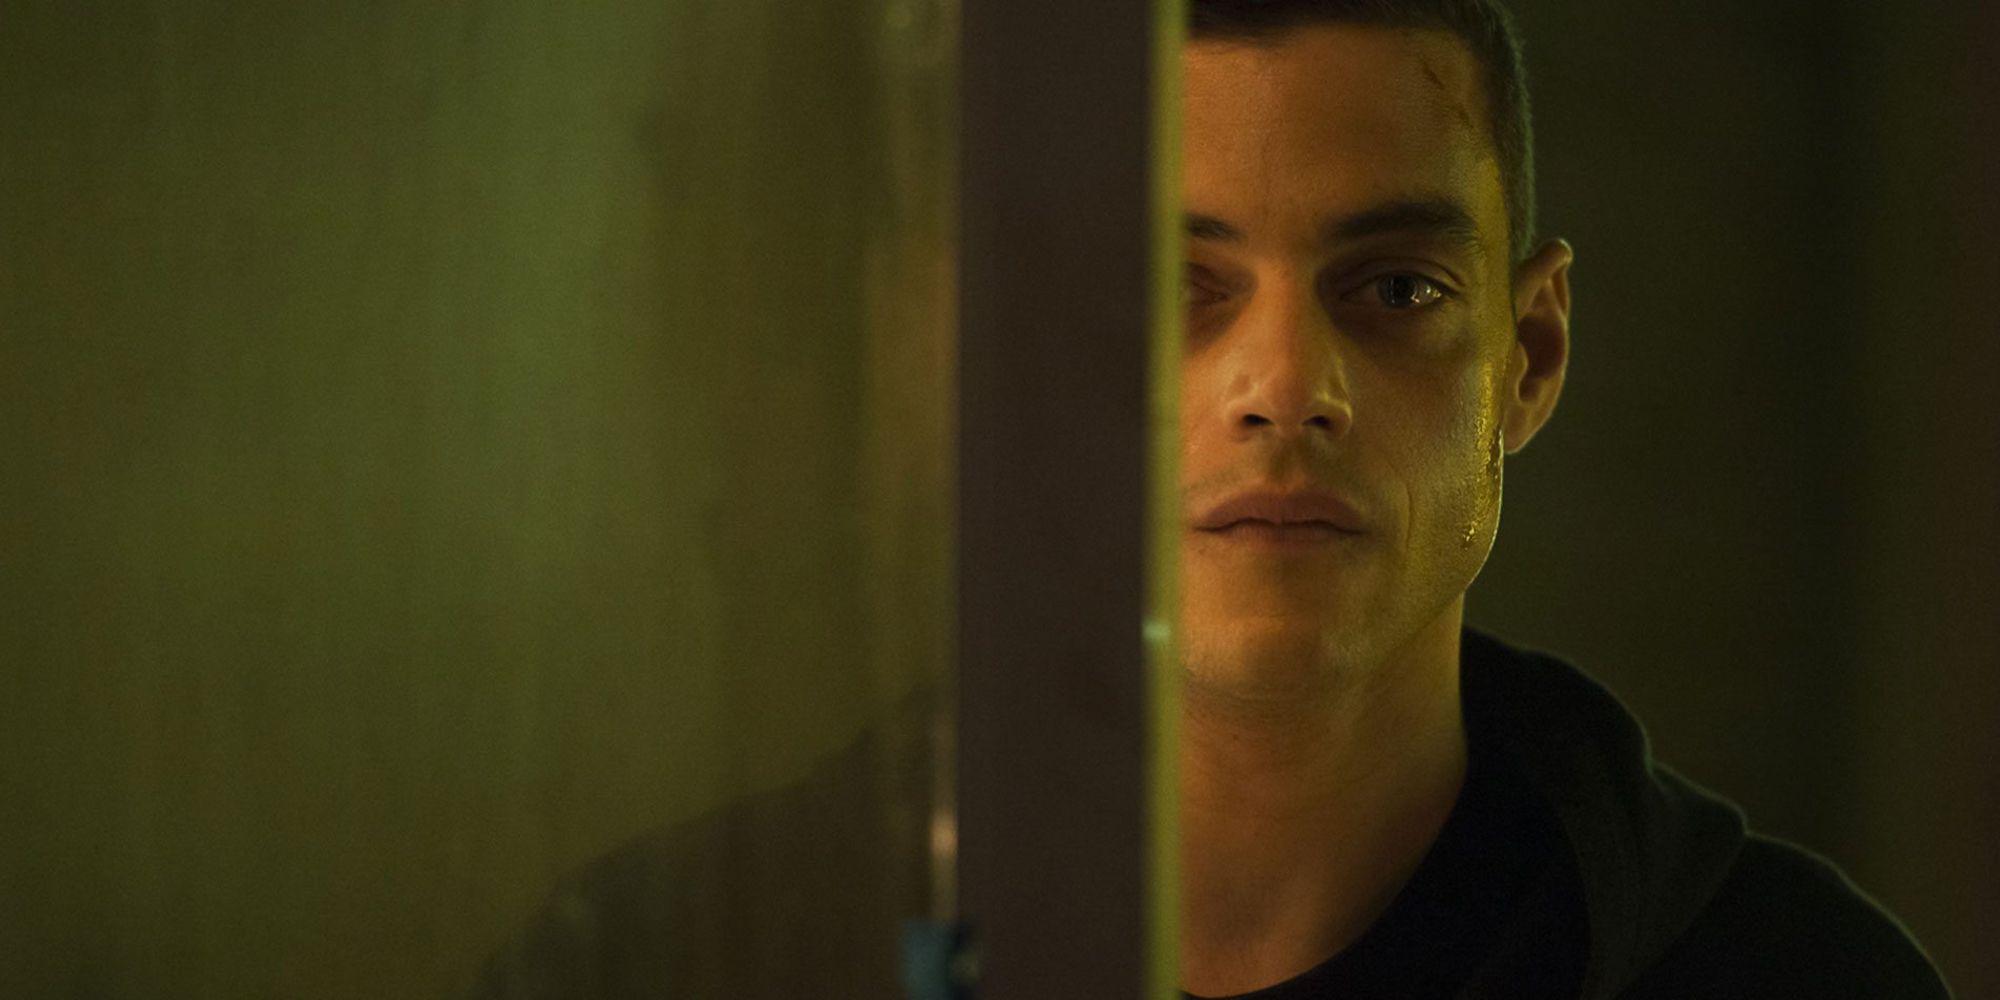 Rami Malek in Mr. Robot looking off to the side with a pole covering part of his face.